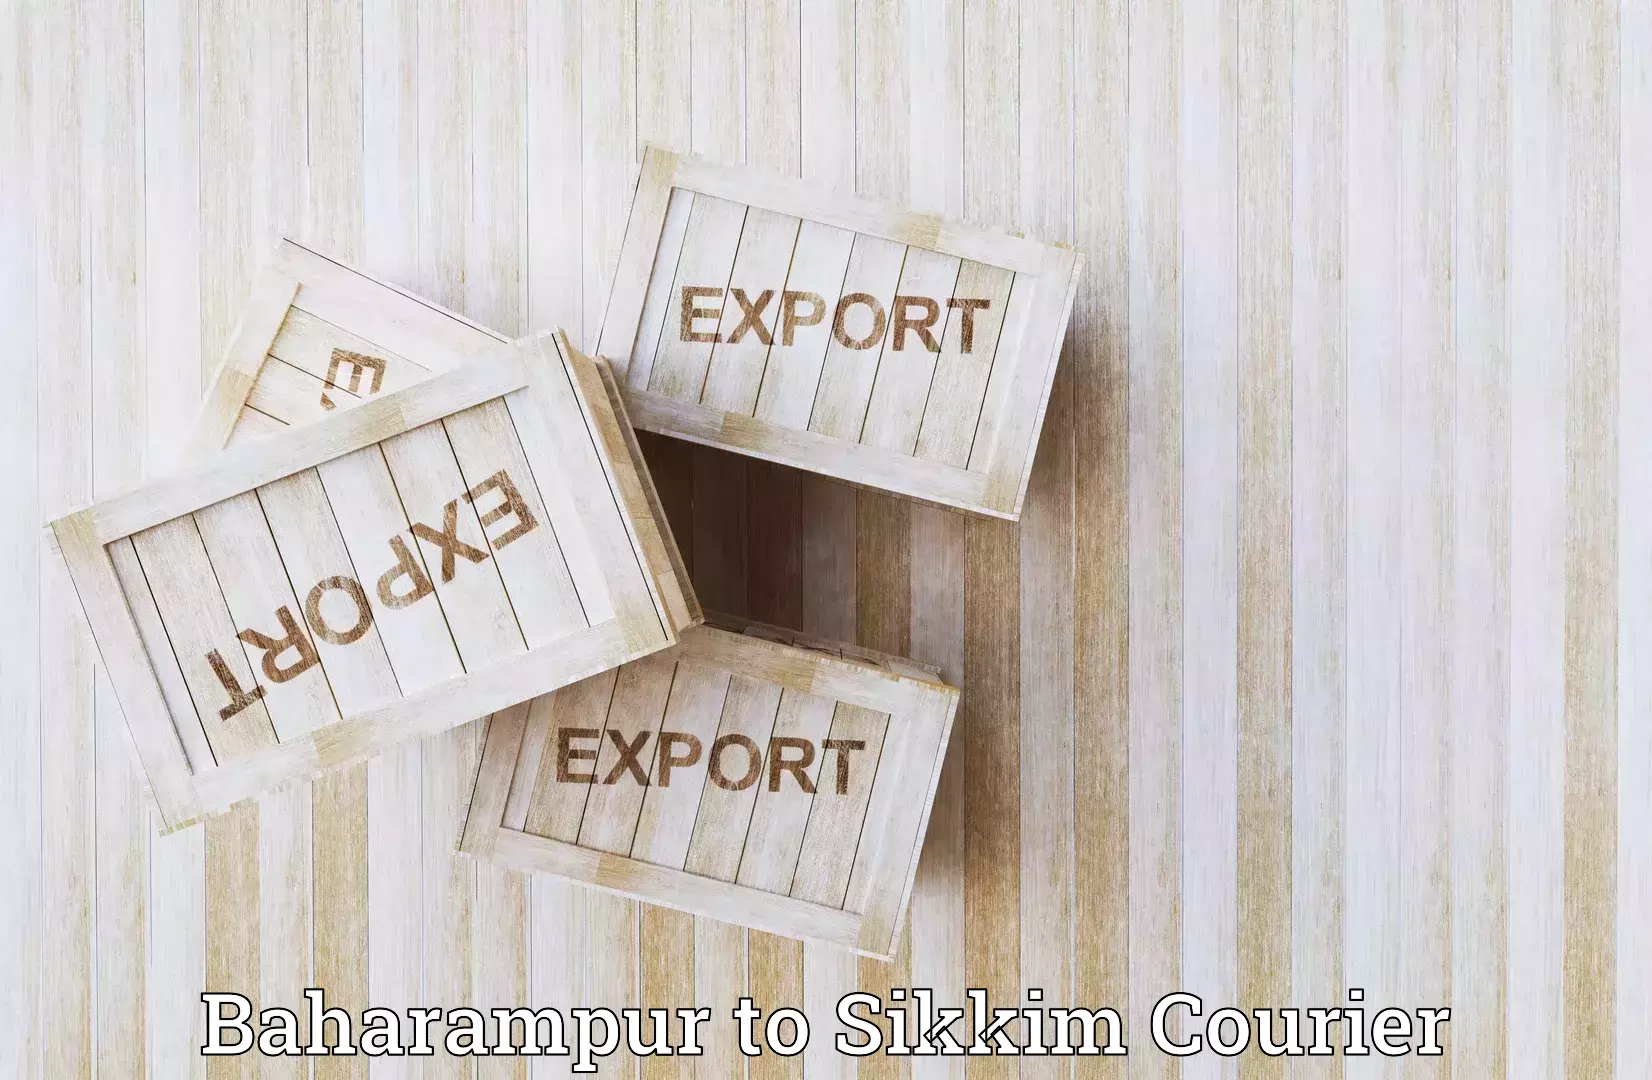 Commercial shipping rates in Baharampur to Gangtok